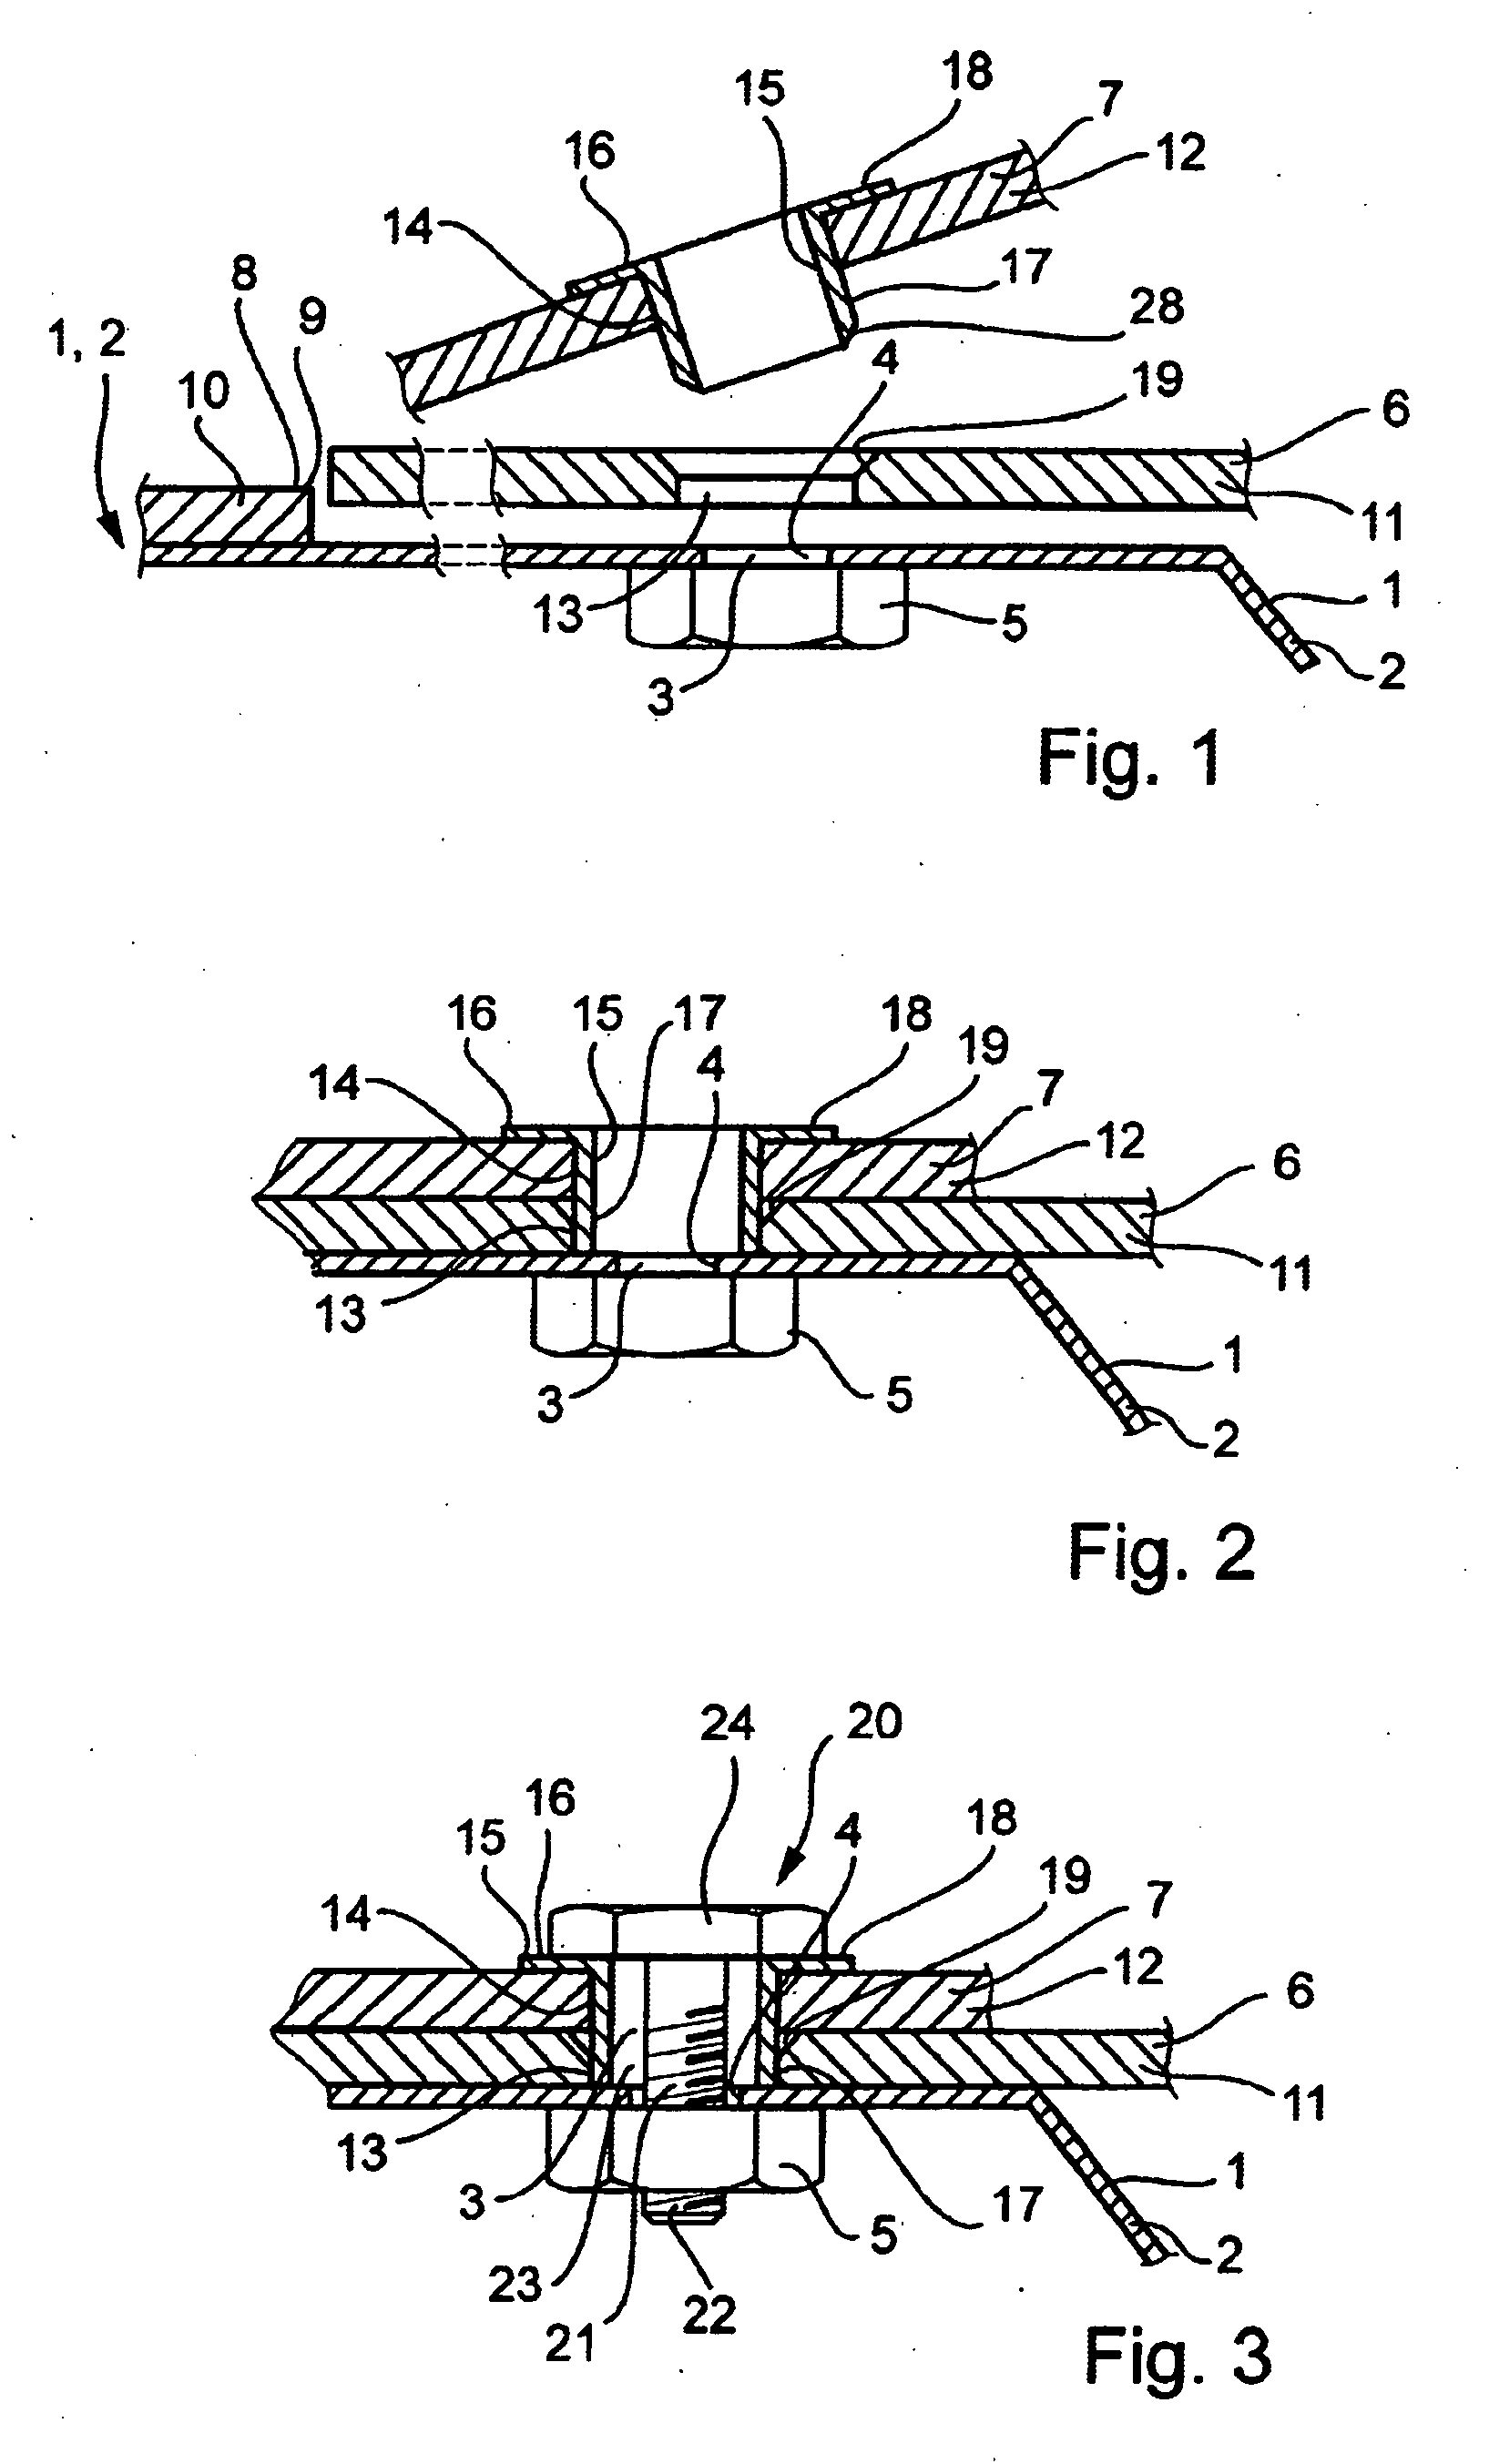 Method for aligning and mounting two components on a support member in a positionally accurate manner